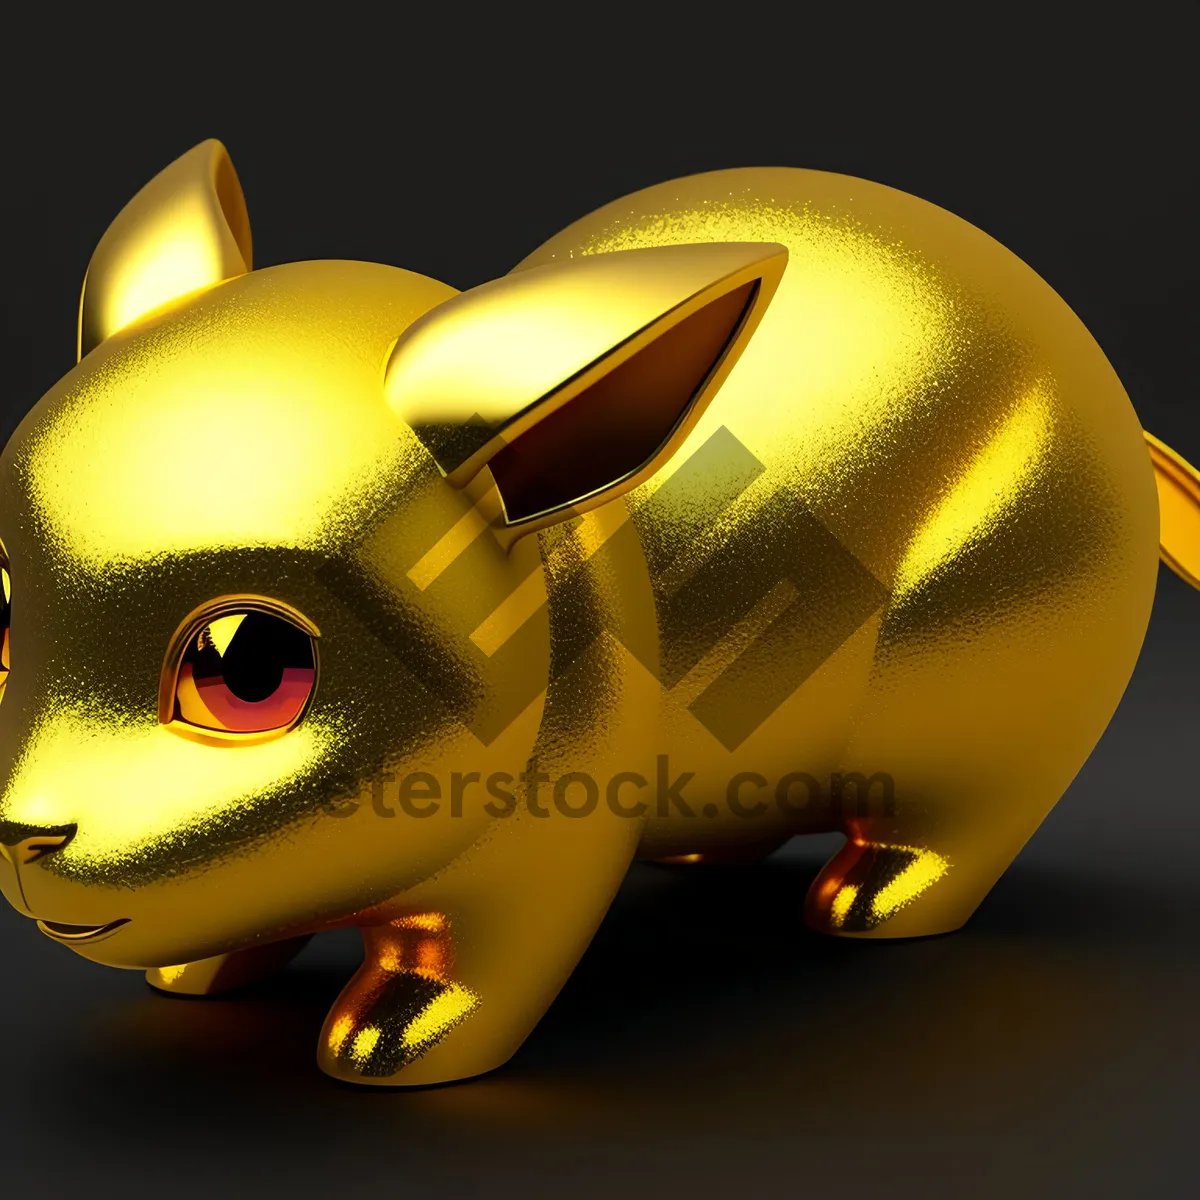 Picture of Fortune Keeper: Ceramic Piggy Bank Filled with Wealth